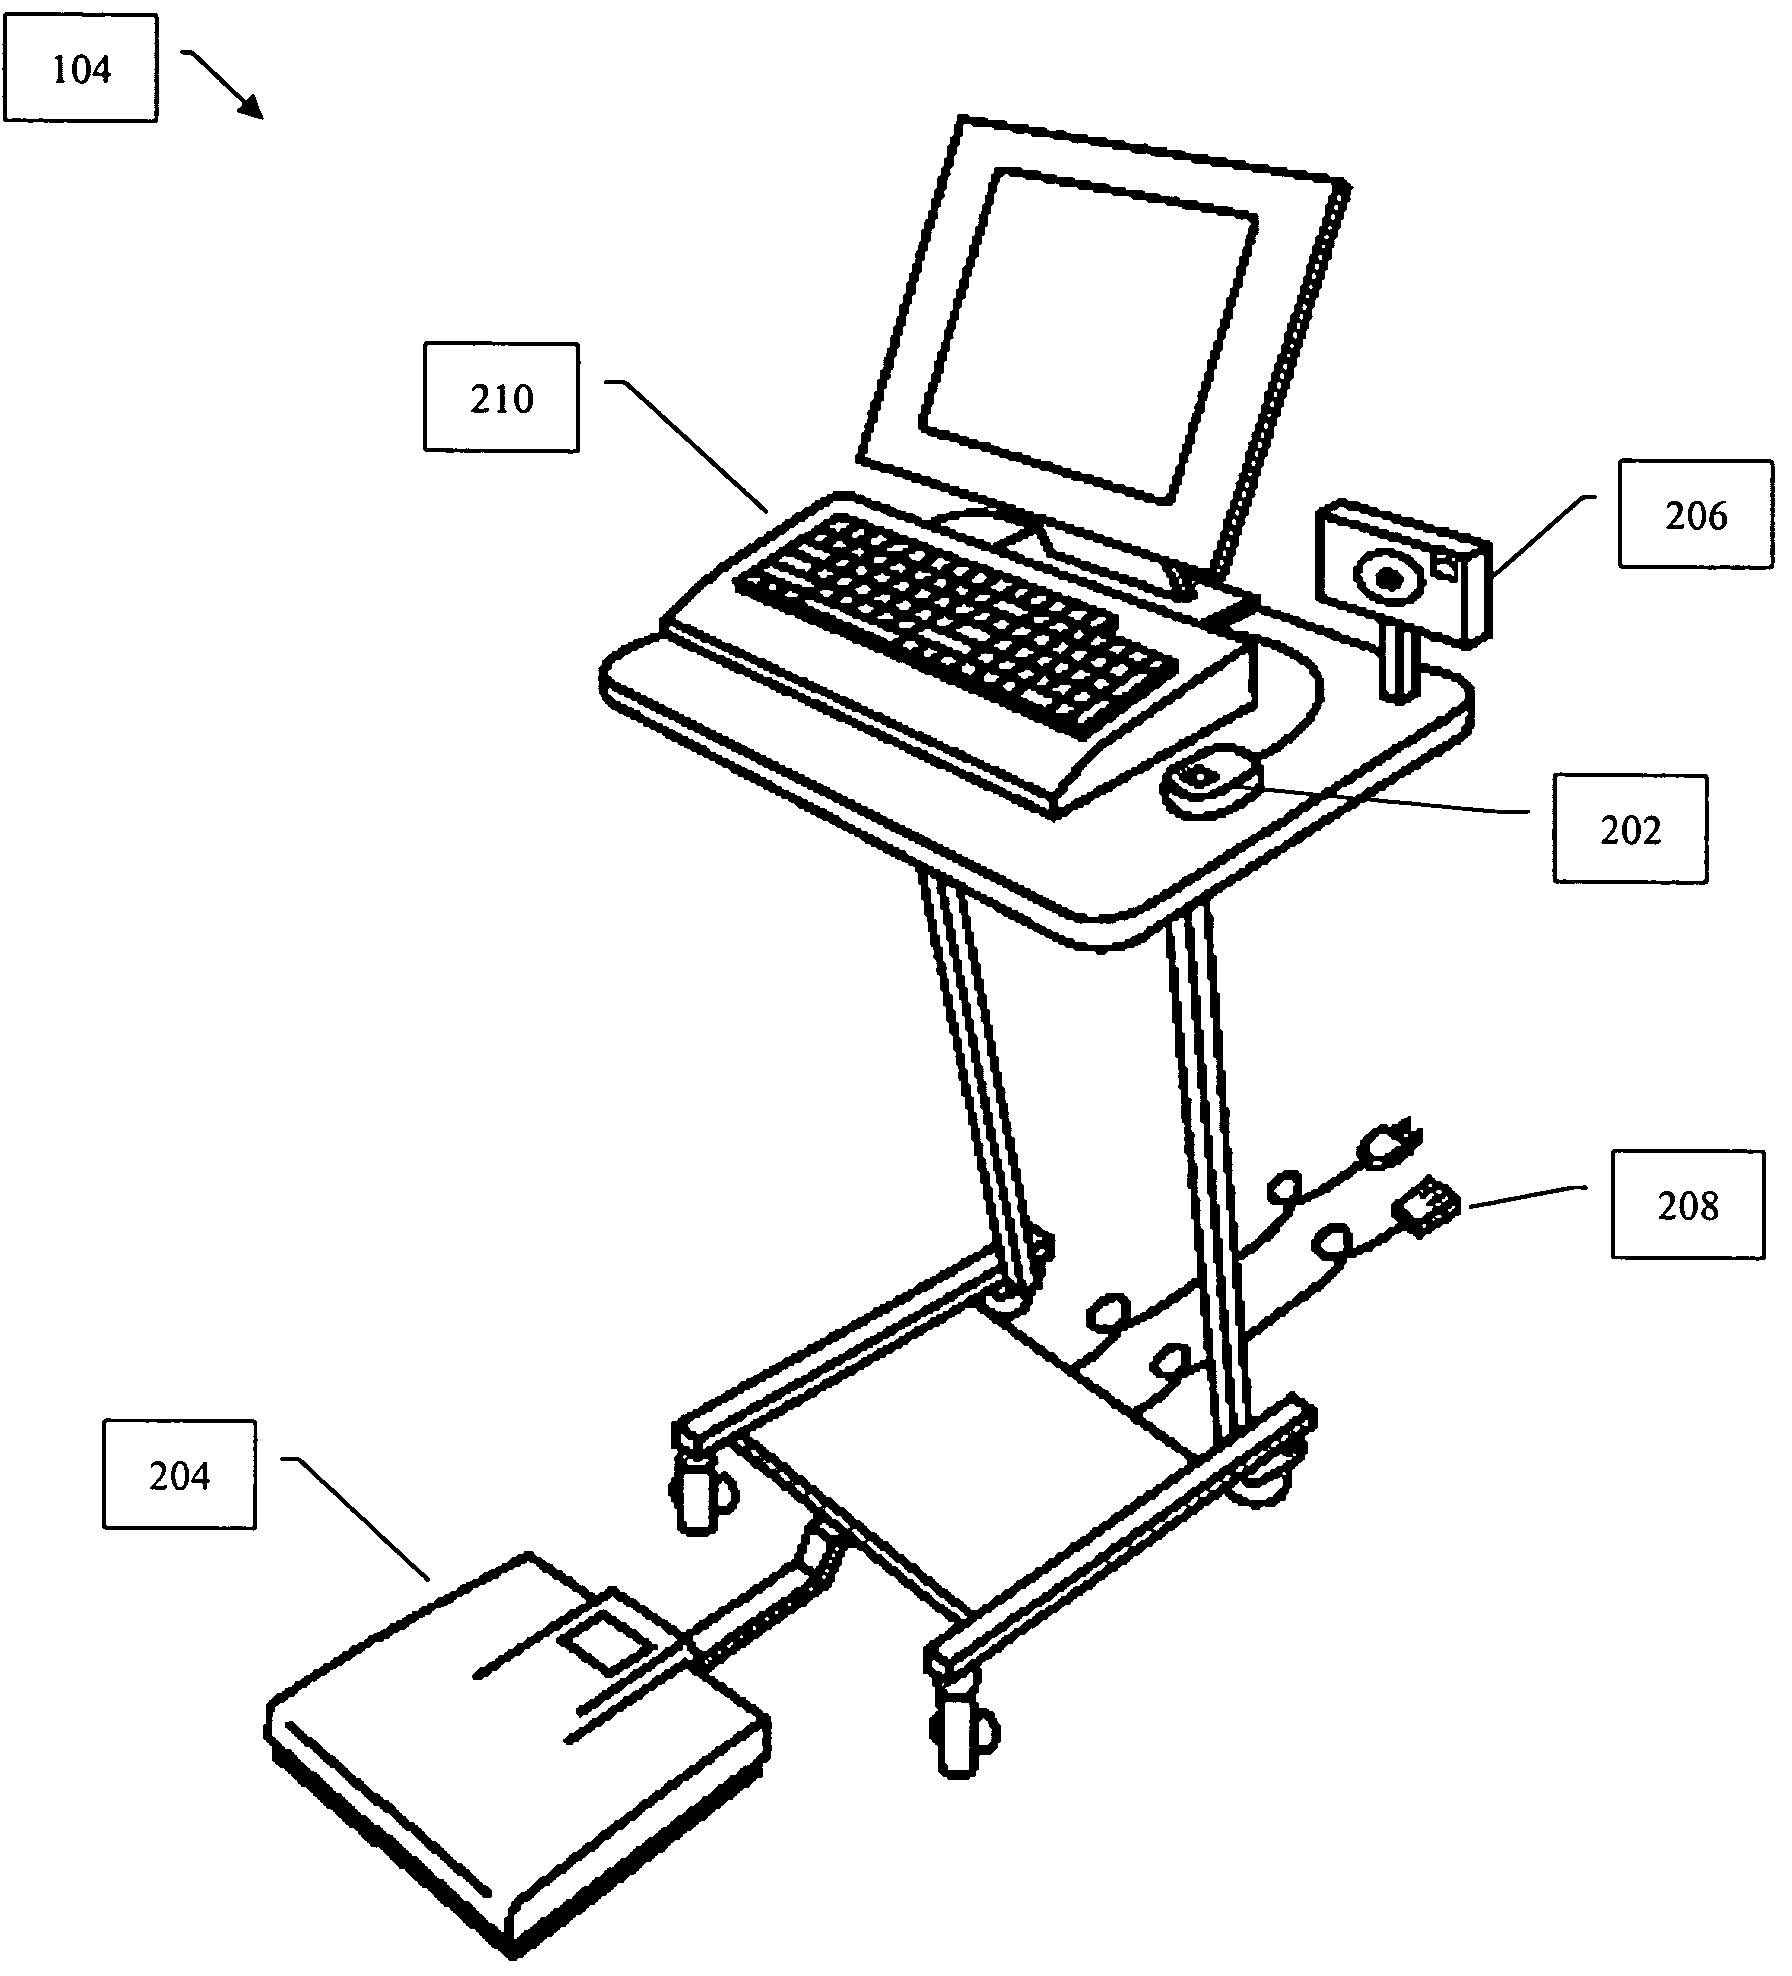 System and method for measuring and distributing monetary incentives for weight loss